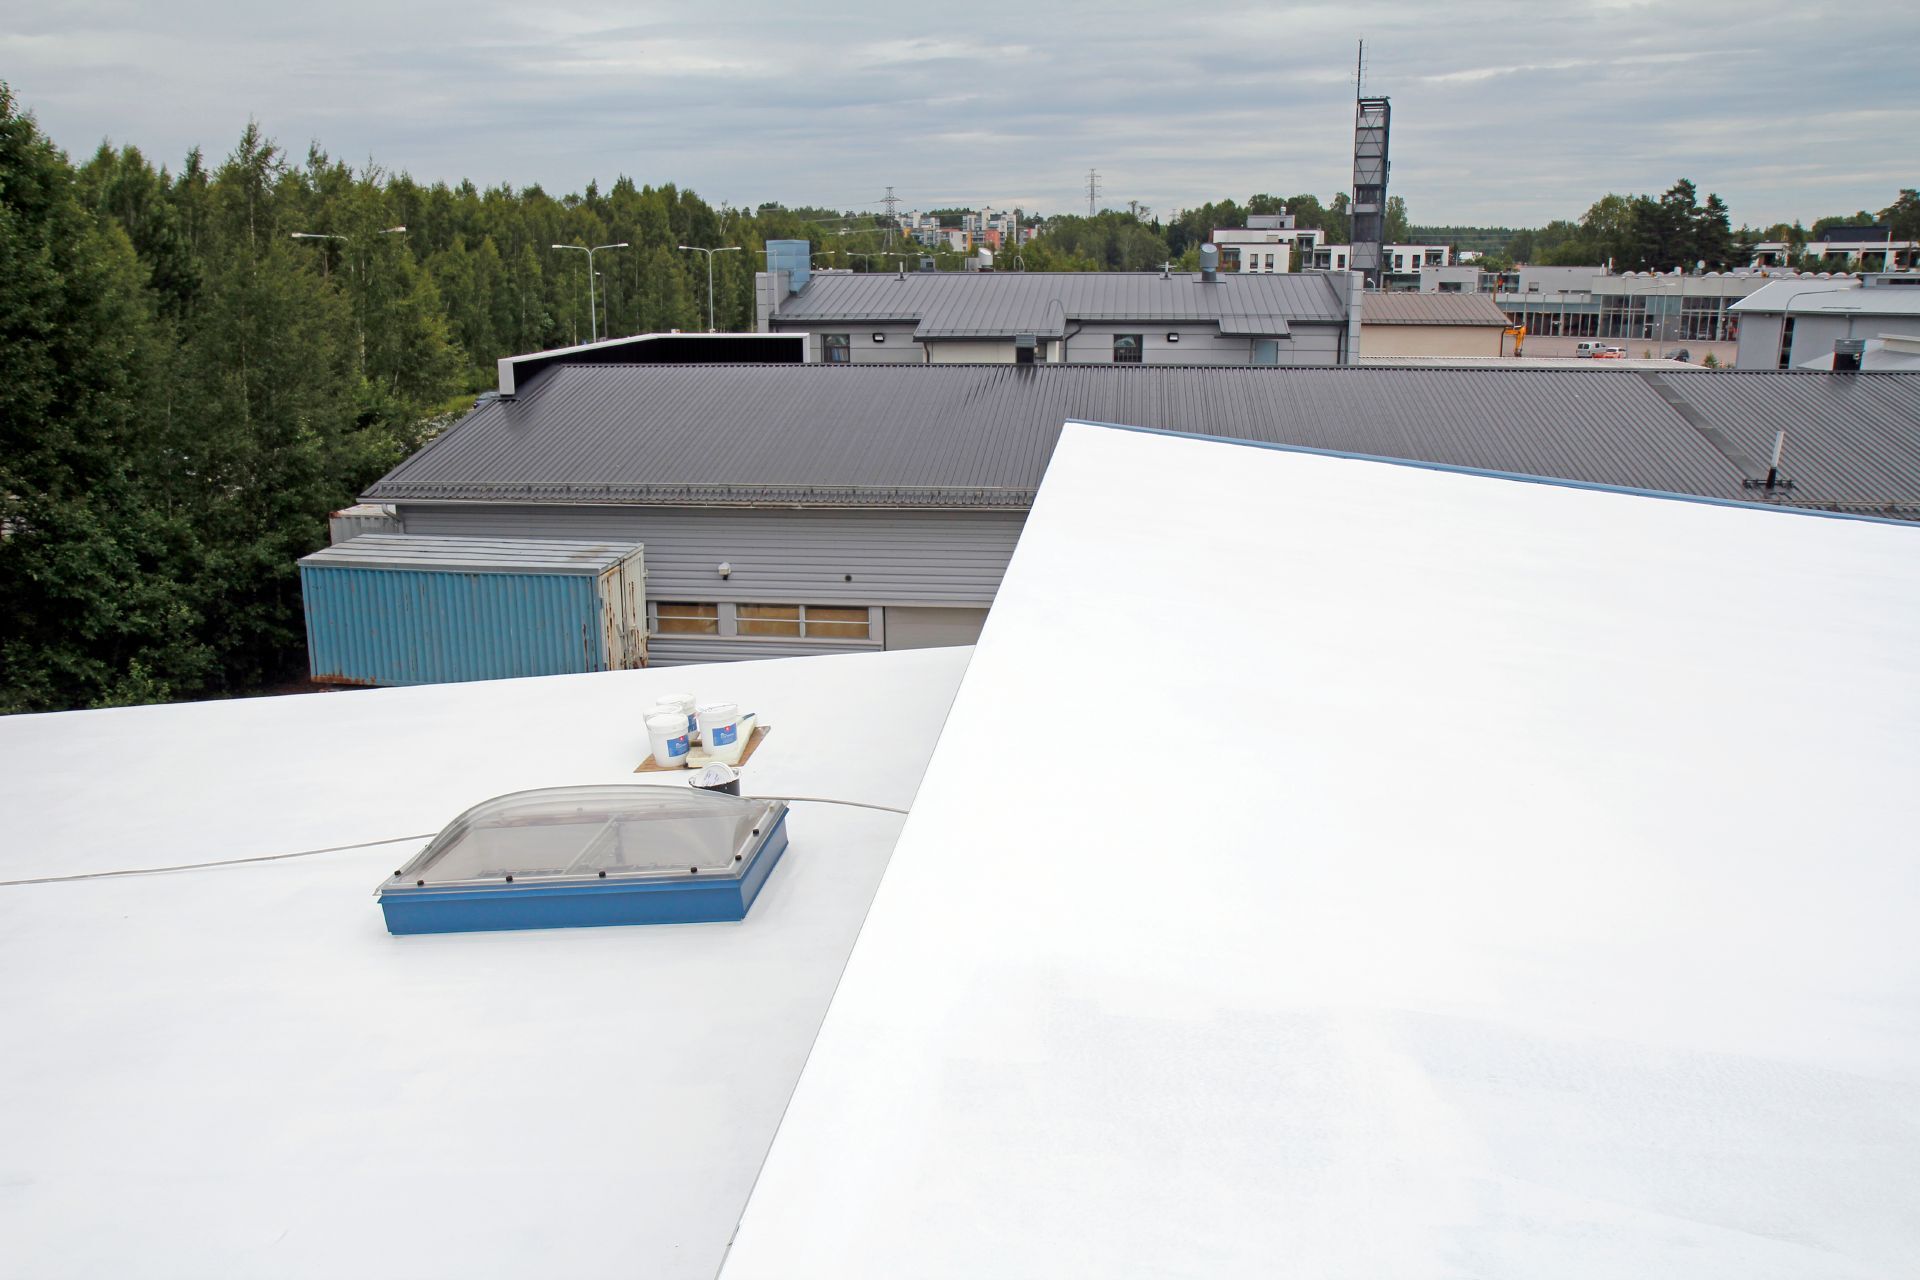 Lower energy consumption for cooling down buildings